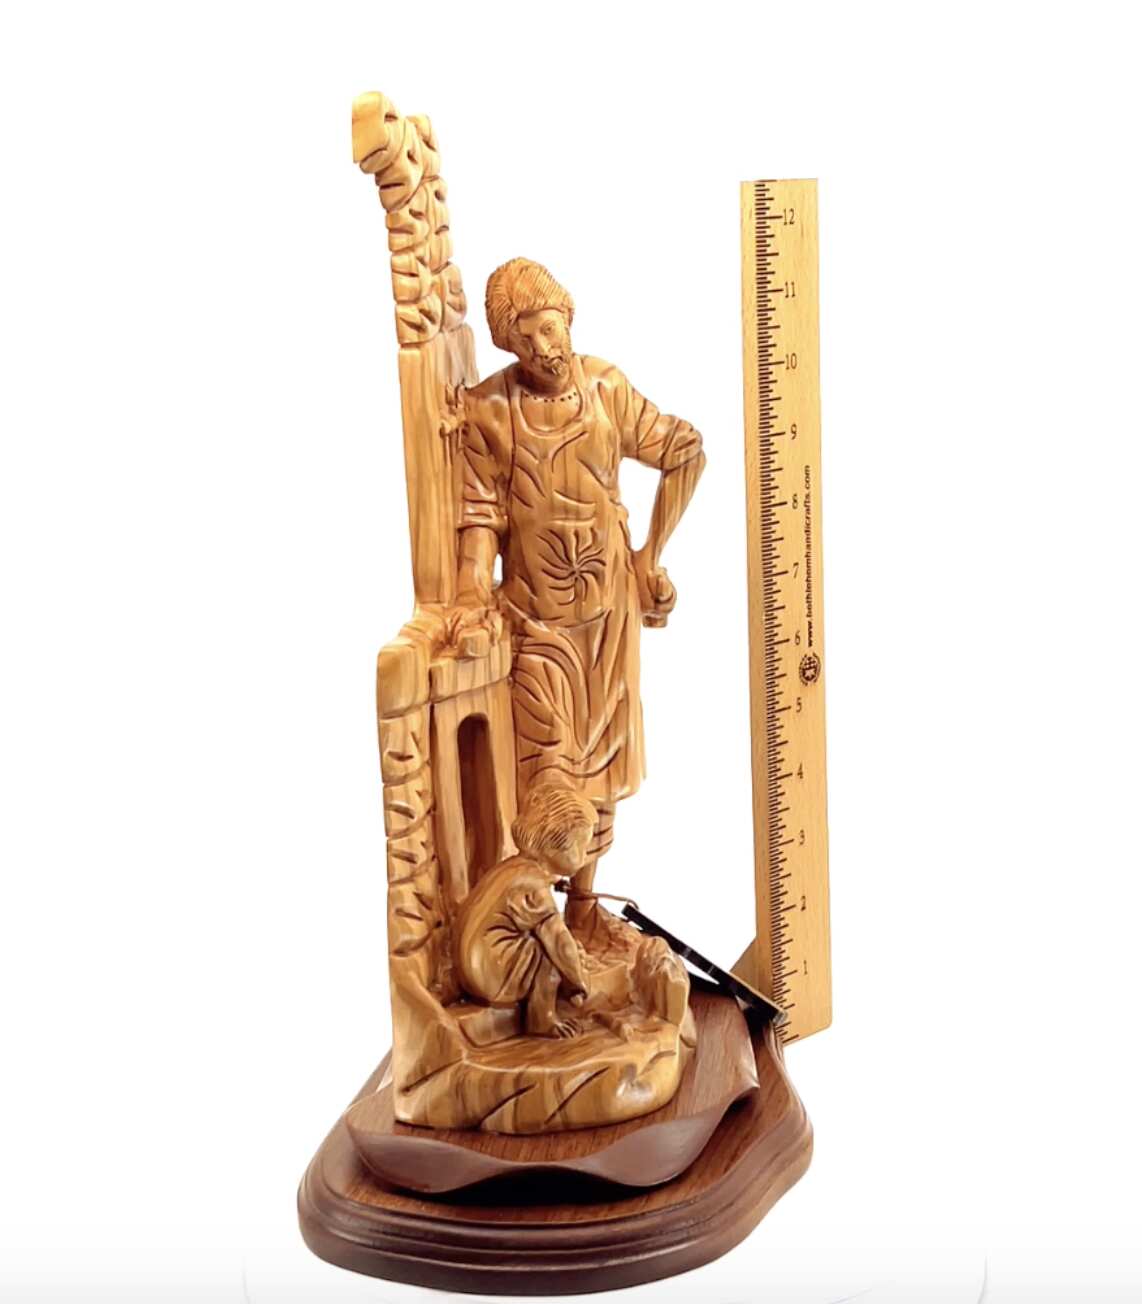 St. Joseph "The Carpenter with Jesus Playing" Sculpture, 14.2" Holy Land Olive Wood Carving